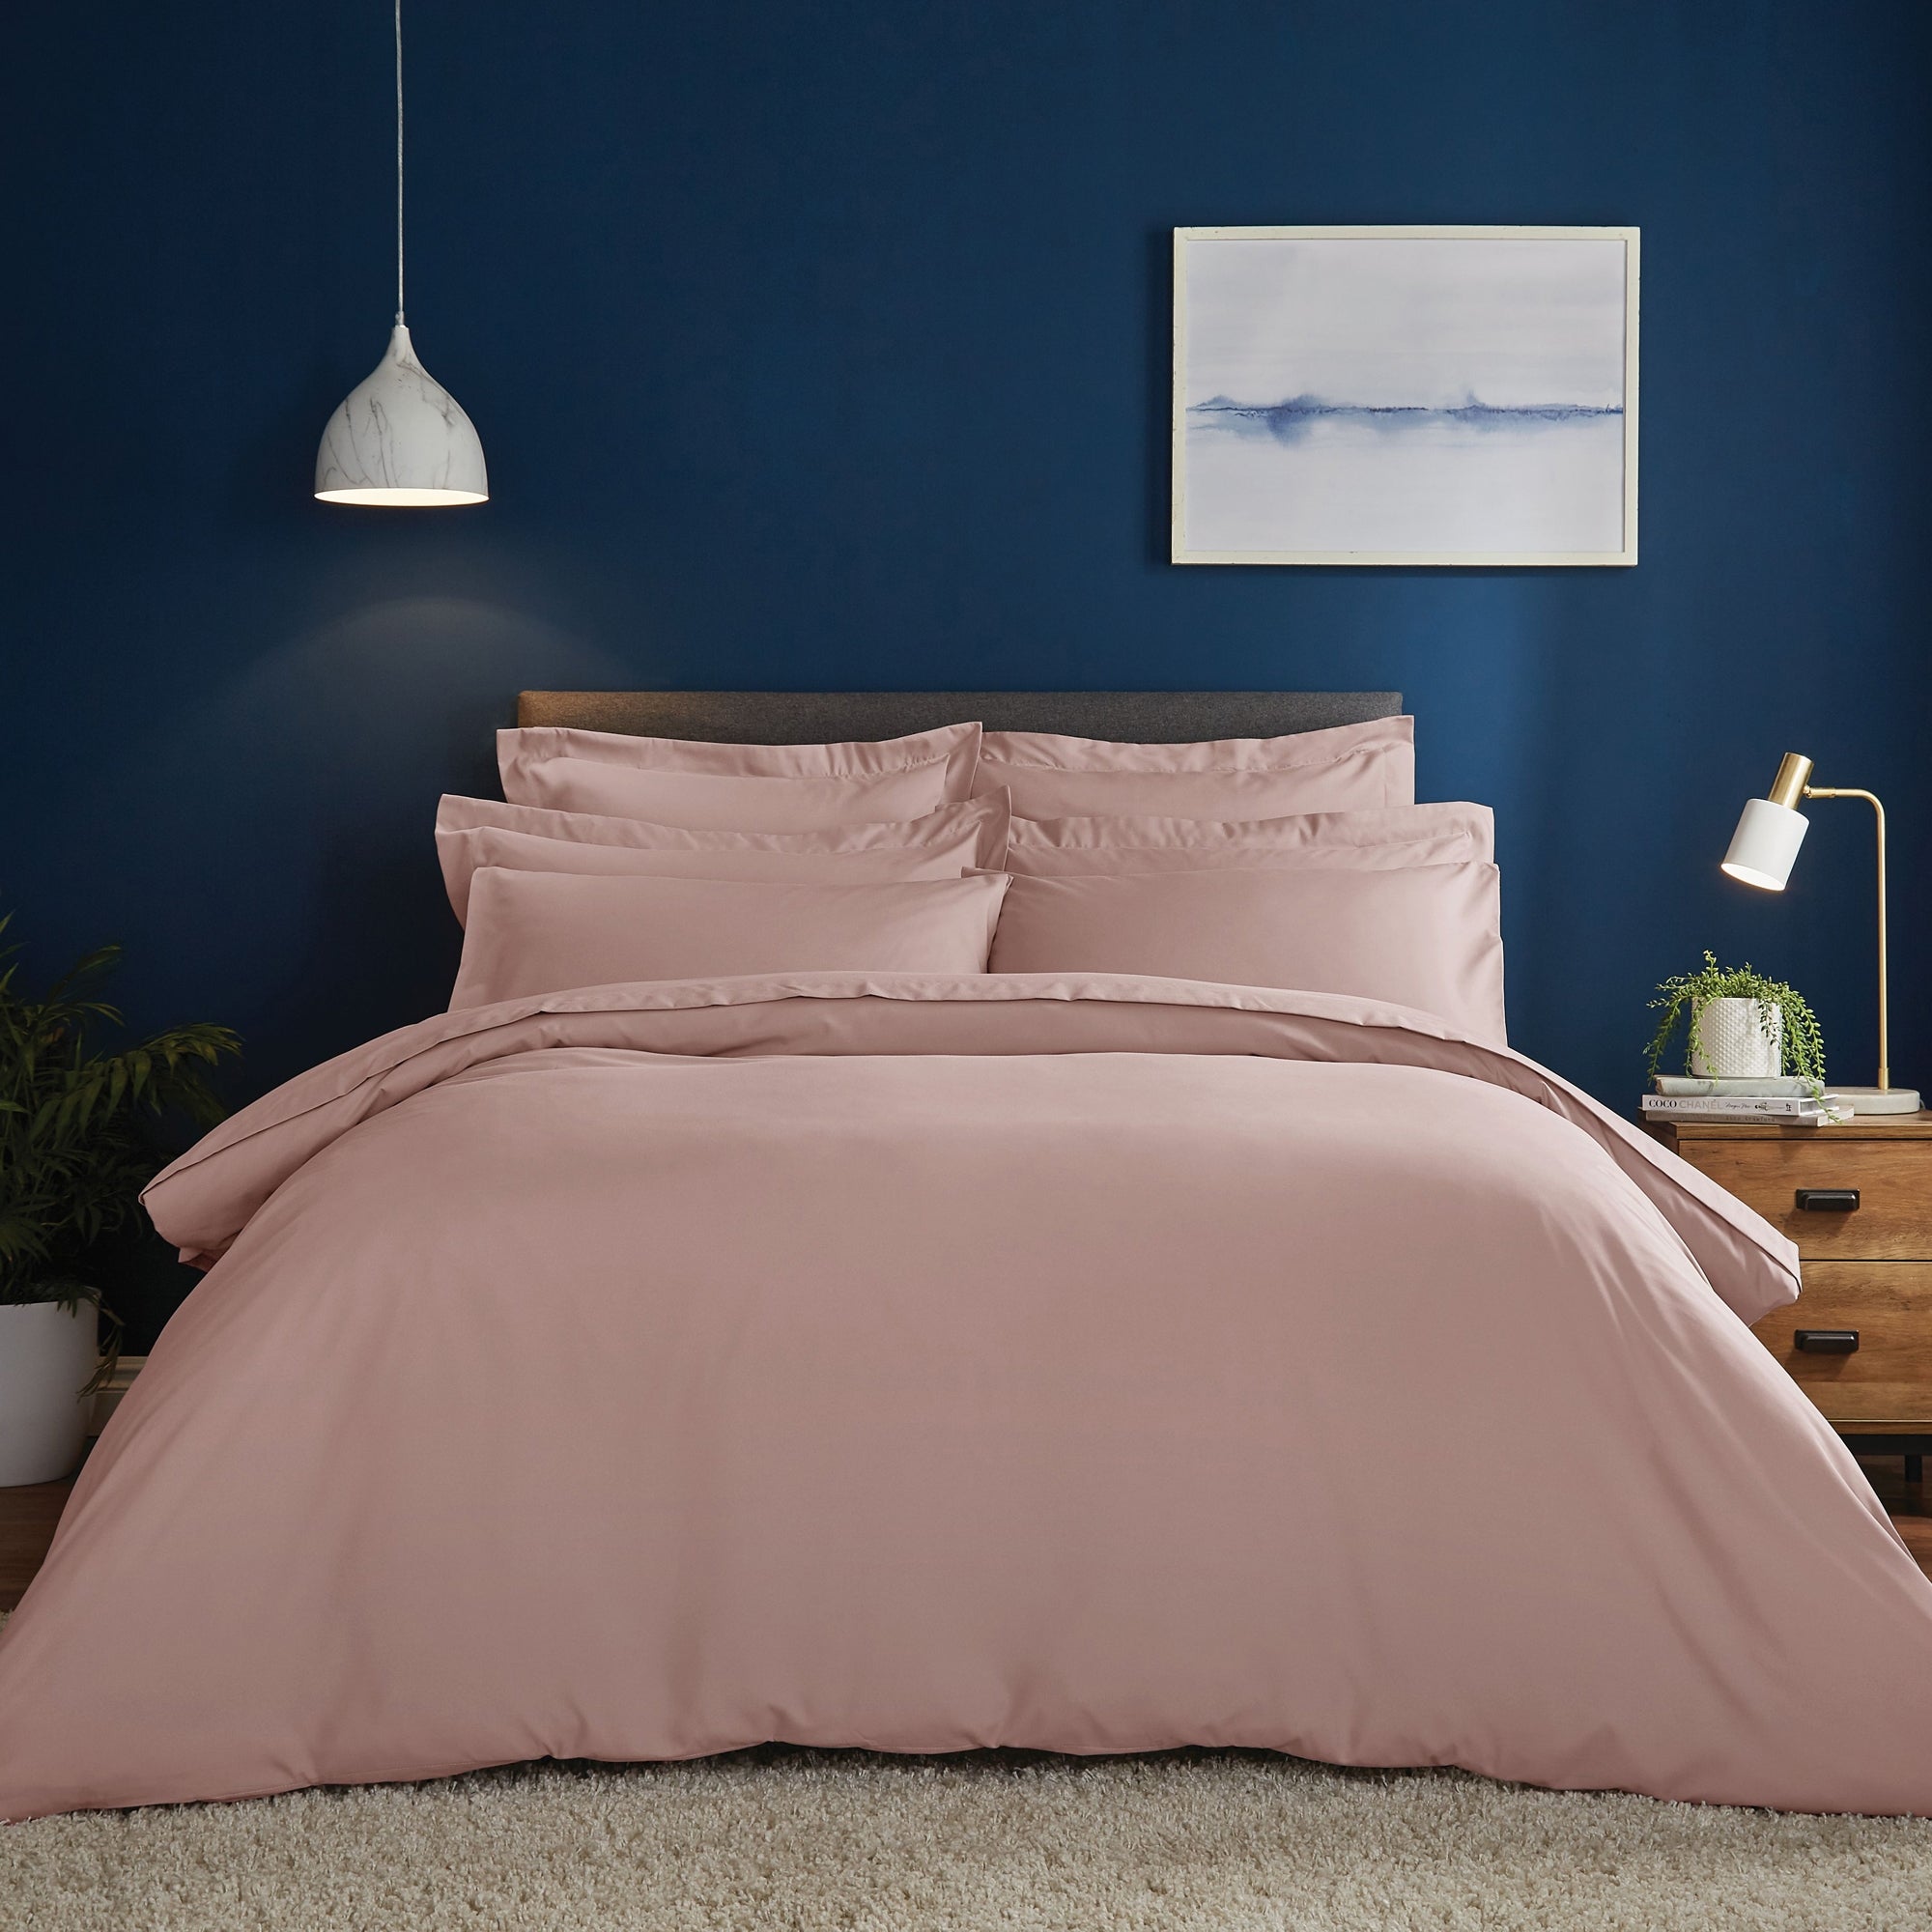 Image of Fogarty Soft Touch Dusty Pink Duvet Cover and Pillowcase Set Pink